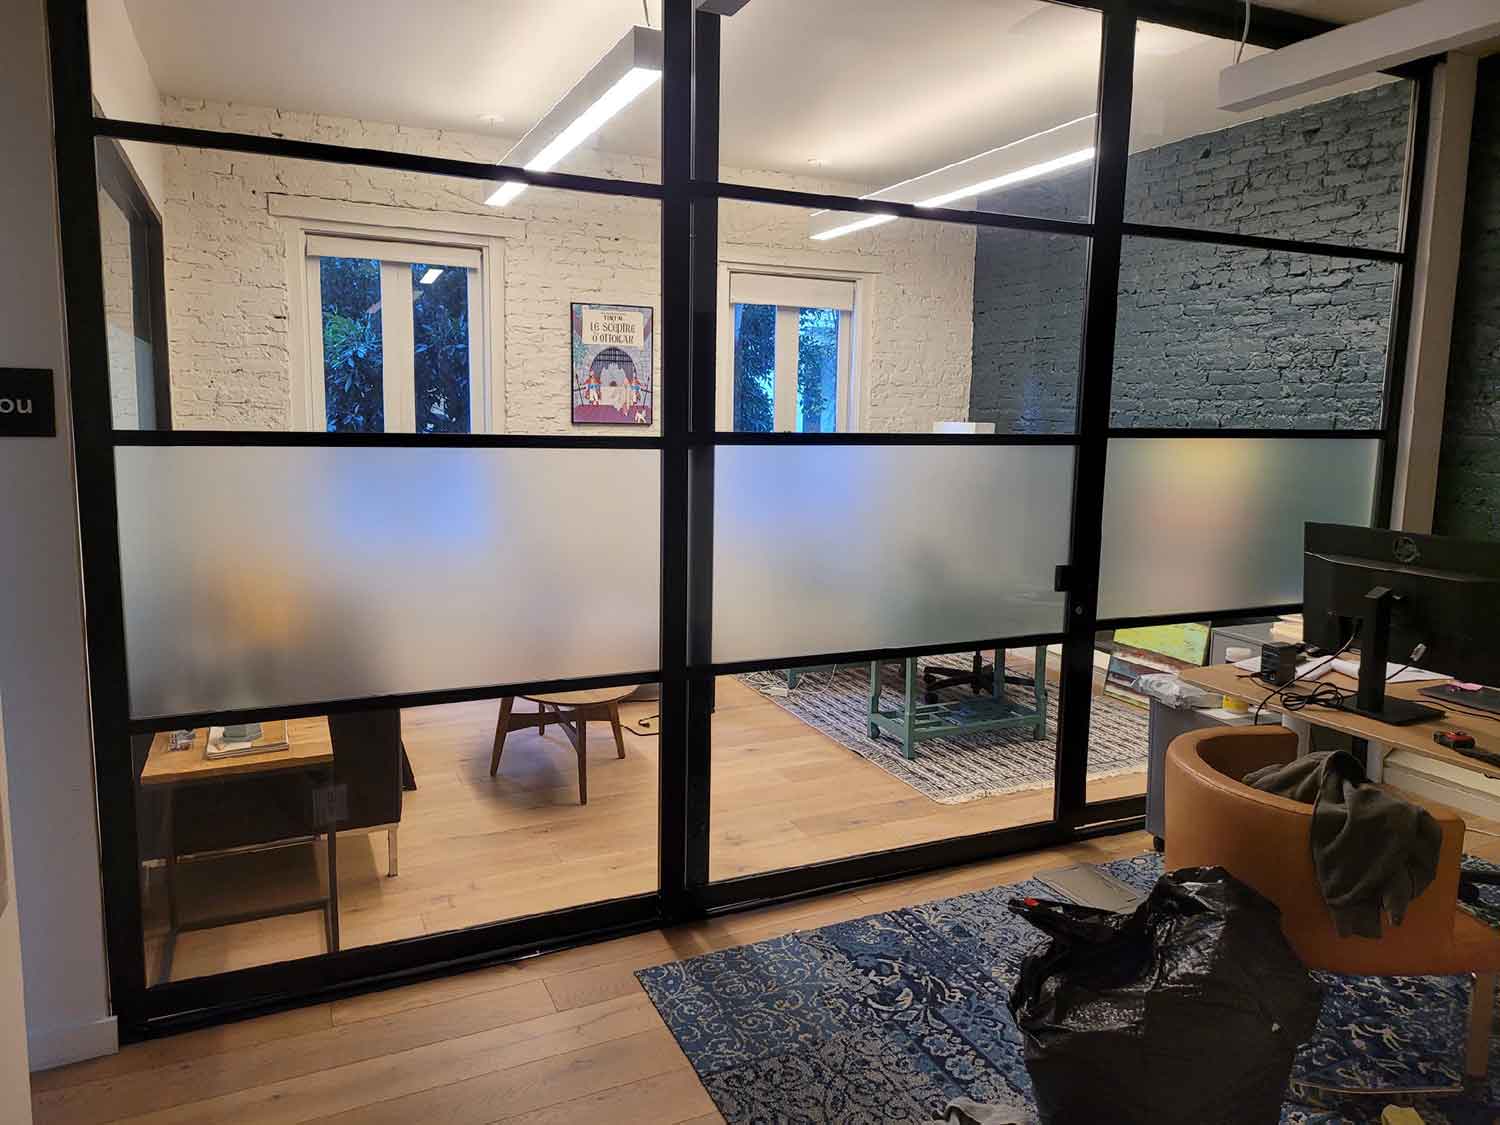 3M Privacy Window tint installed in a San Francisco office by ClimatePro.